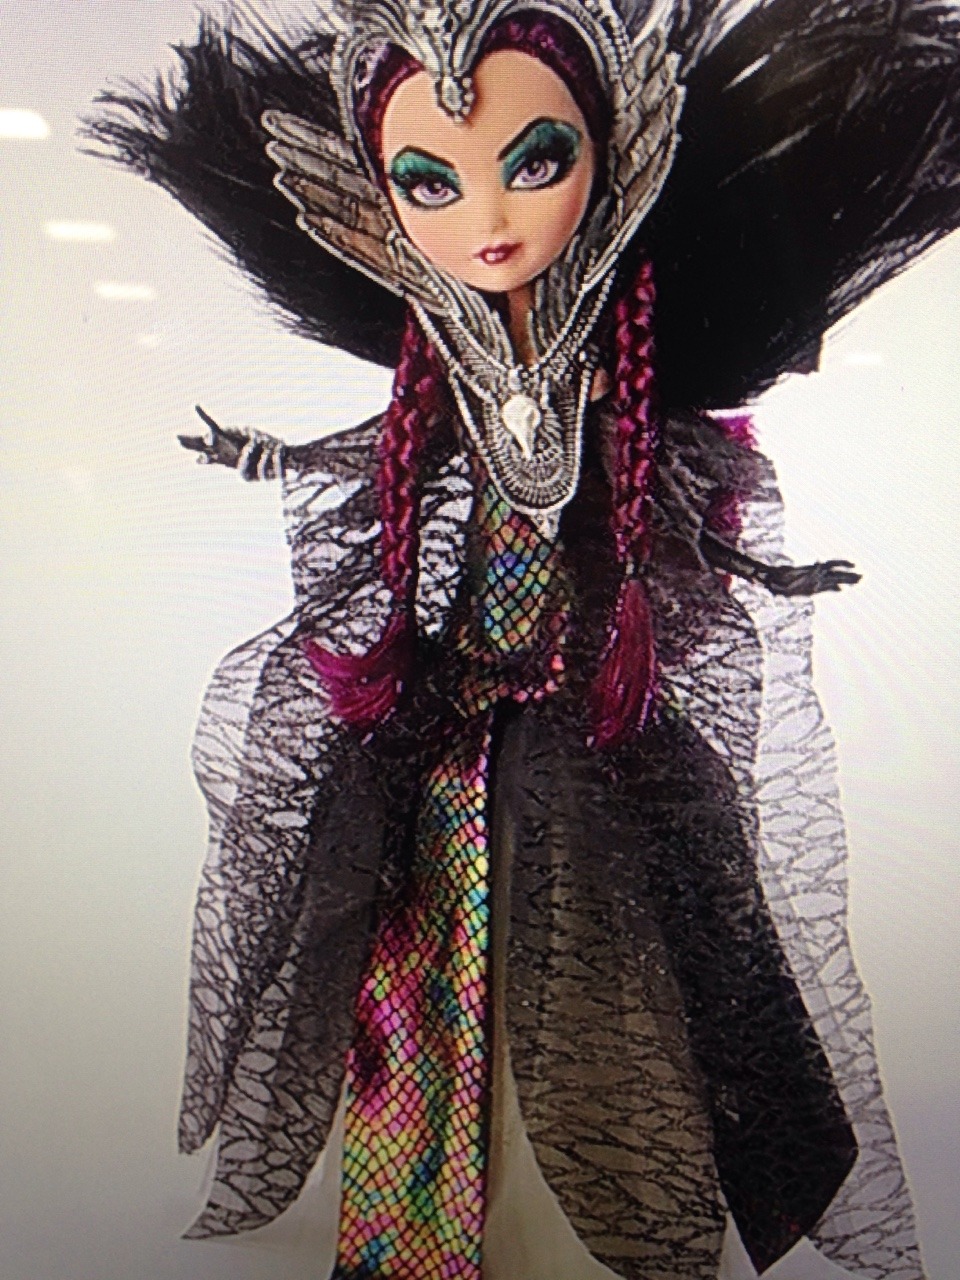 teatime-with-maddie:

everaftermonsters:

Evil Raven with a different dress, this is what was advertised as her while in line to by Mattel stuff at sdcc

Huh, is this like the prototype of her or something? Interesting!